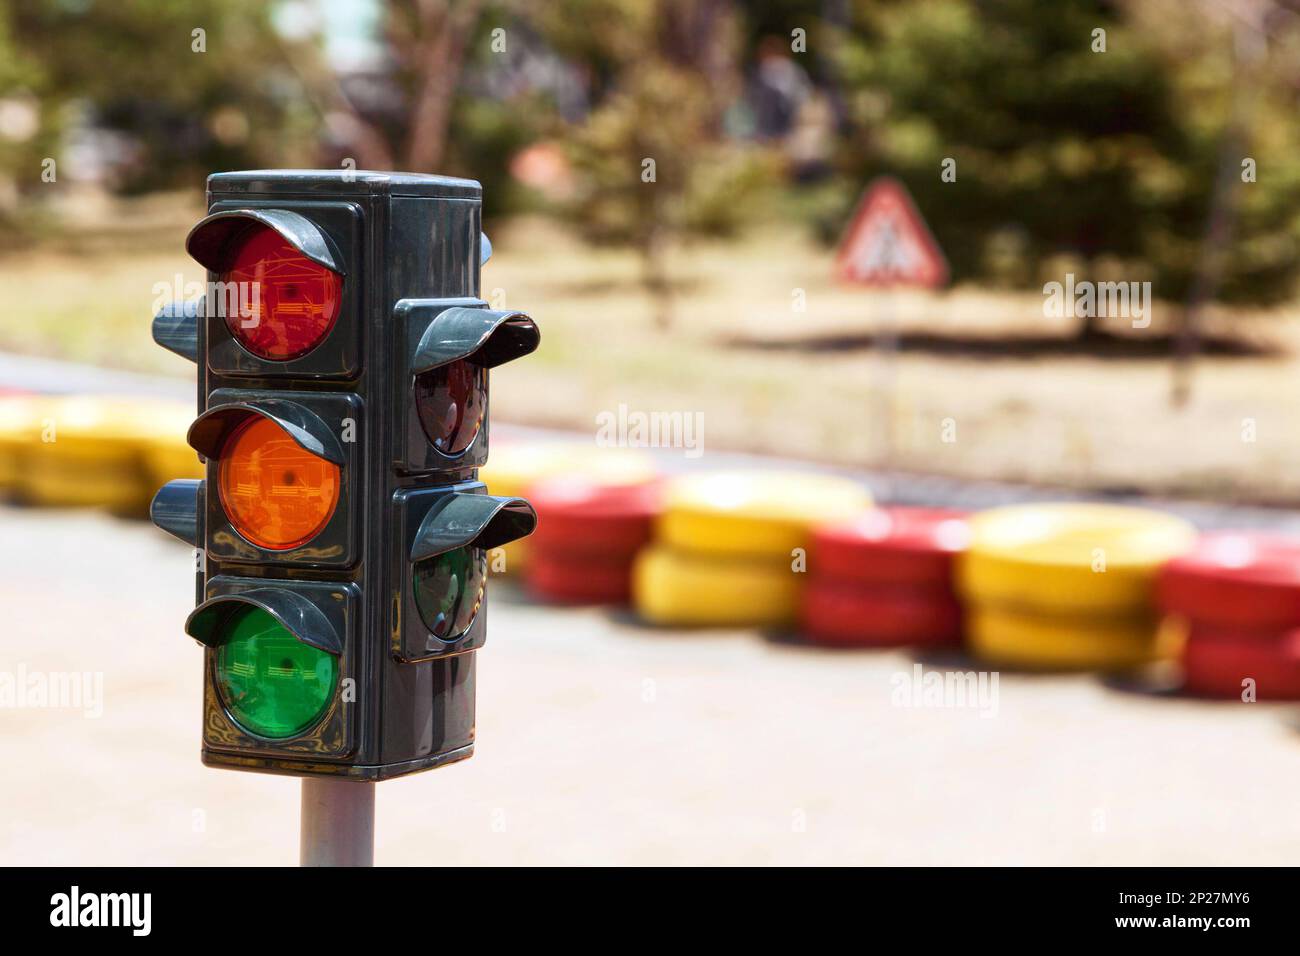 Small traffic light toy for kids learning street rules at kindergarten. Road safety education game for children Stock Photo